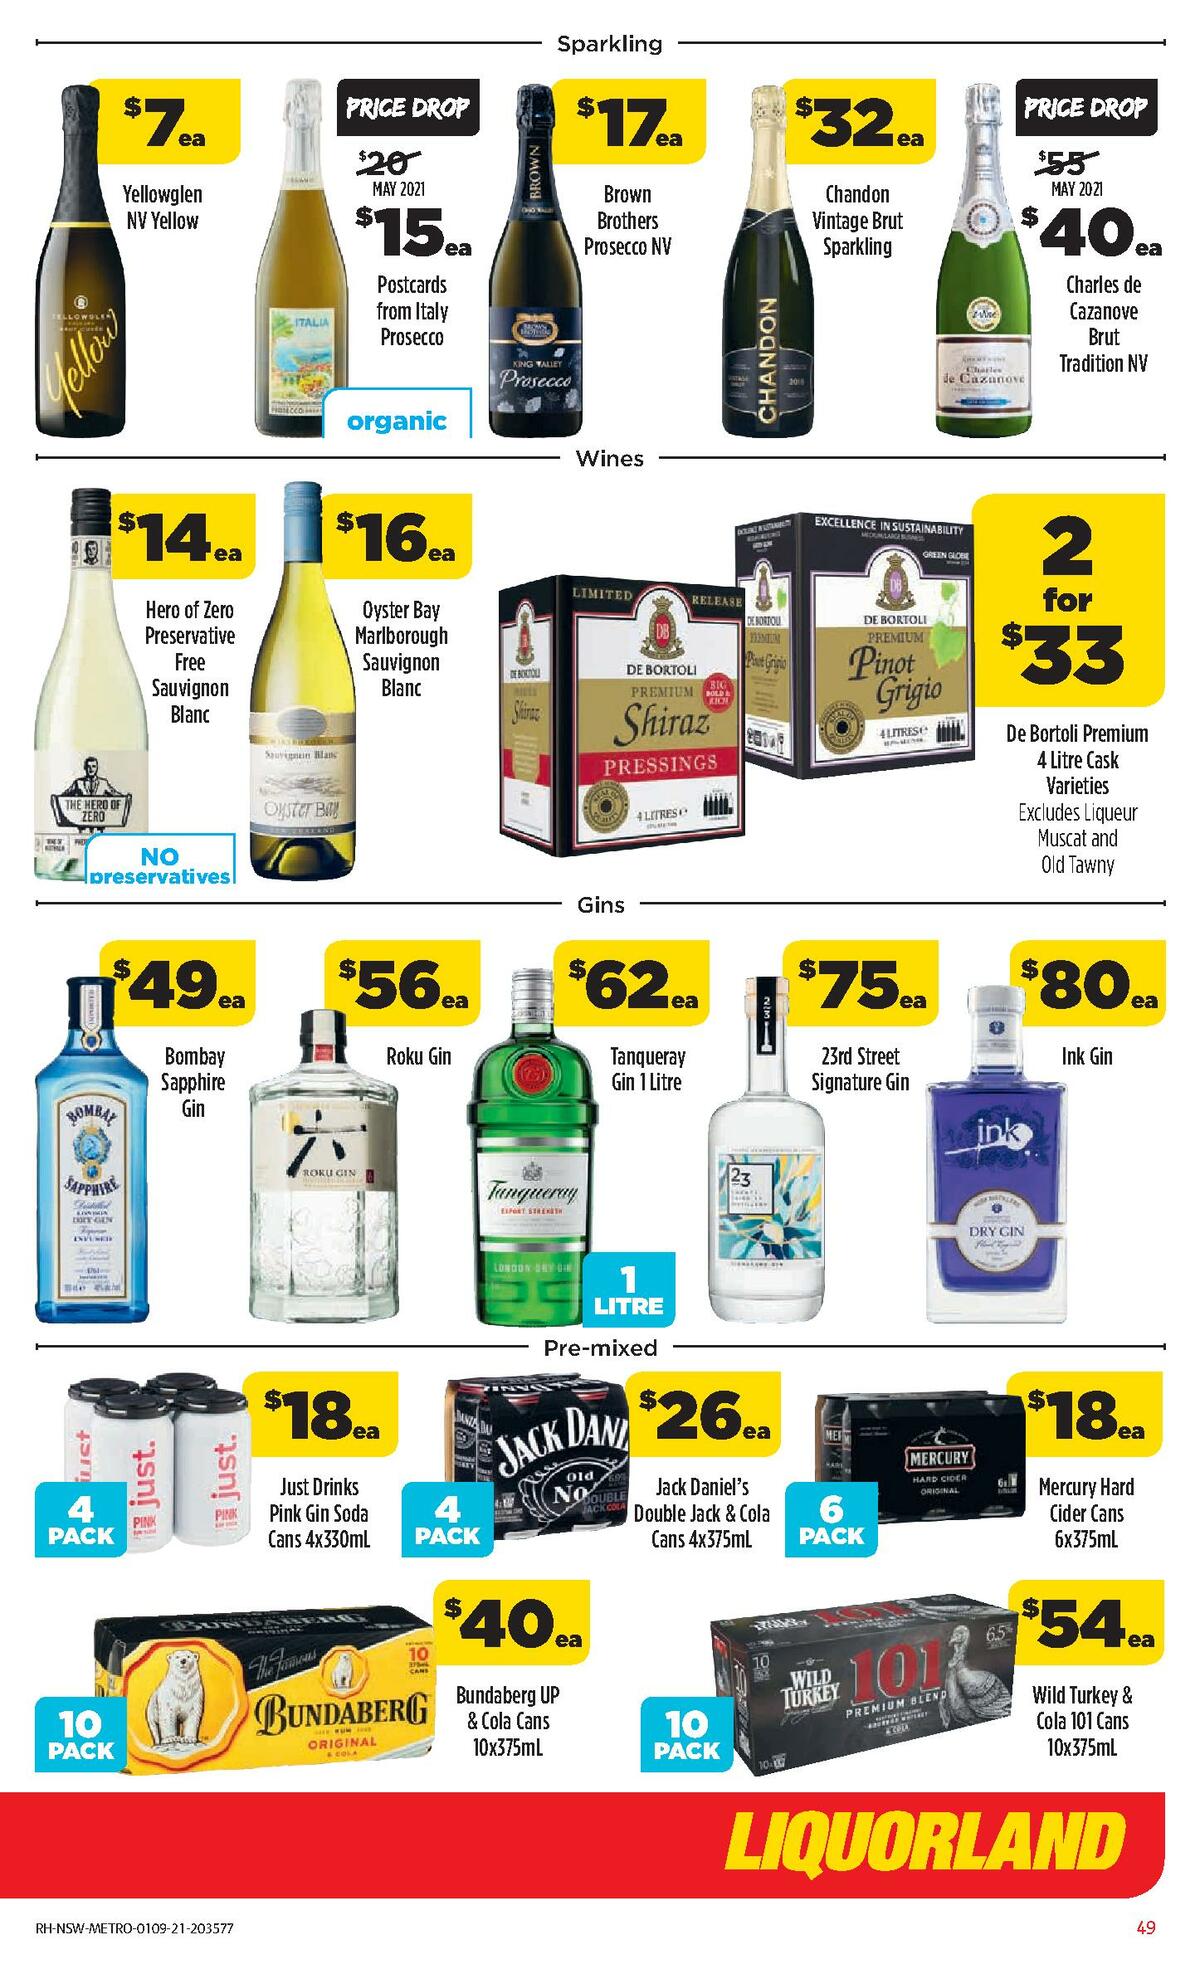 Coles Catalogues from 1 September